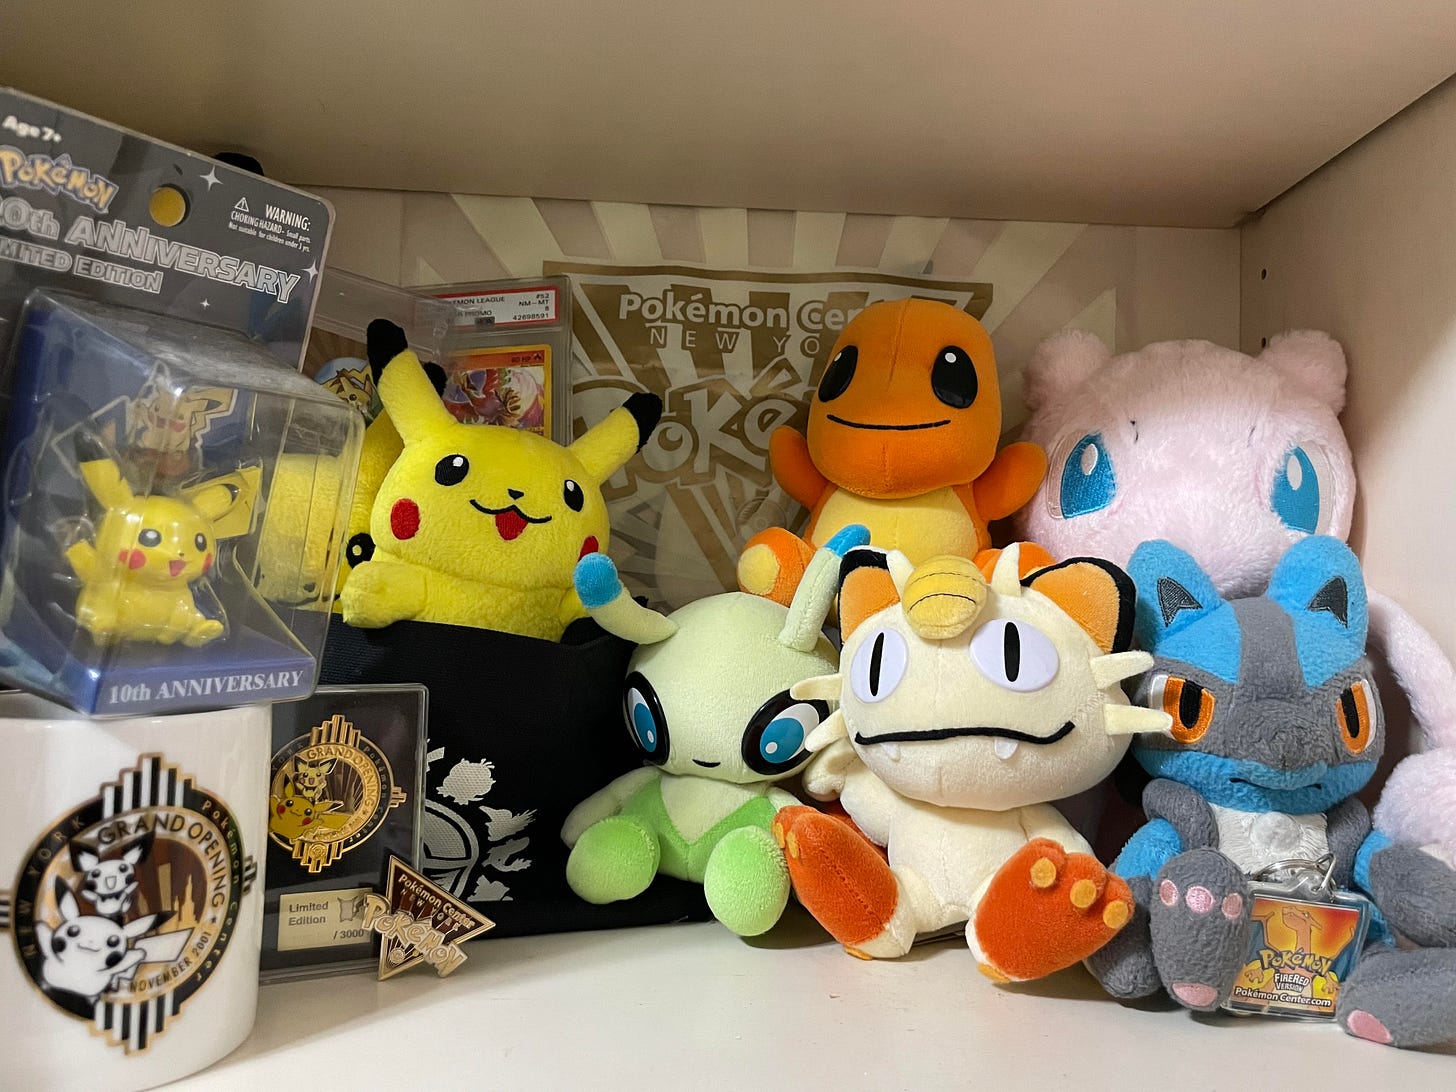 A selection of Julie's Pokémon plush toys and merchandise from the Pokémon Center New York